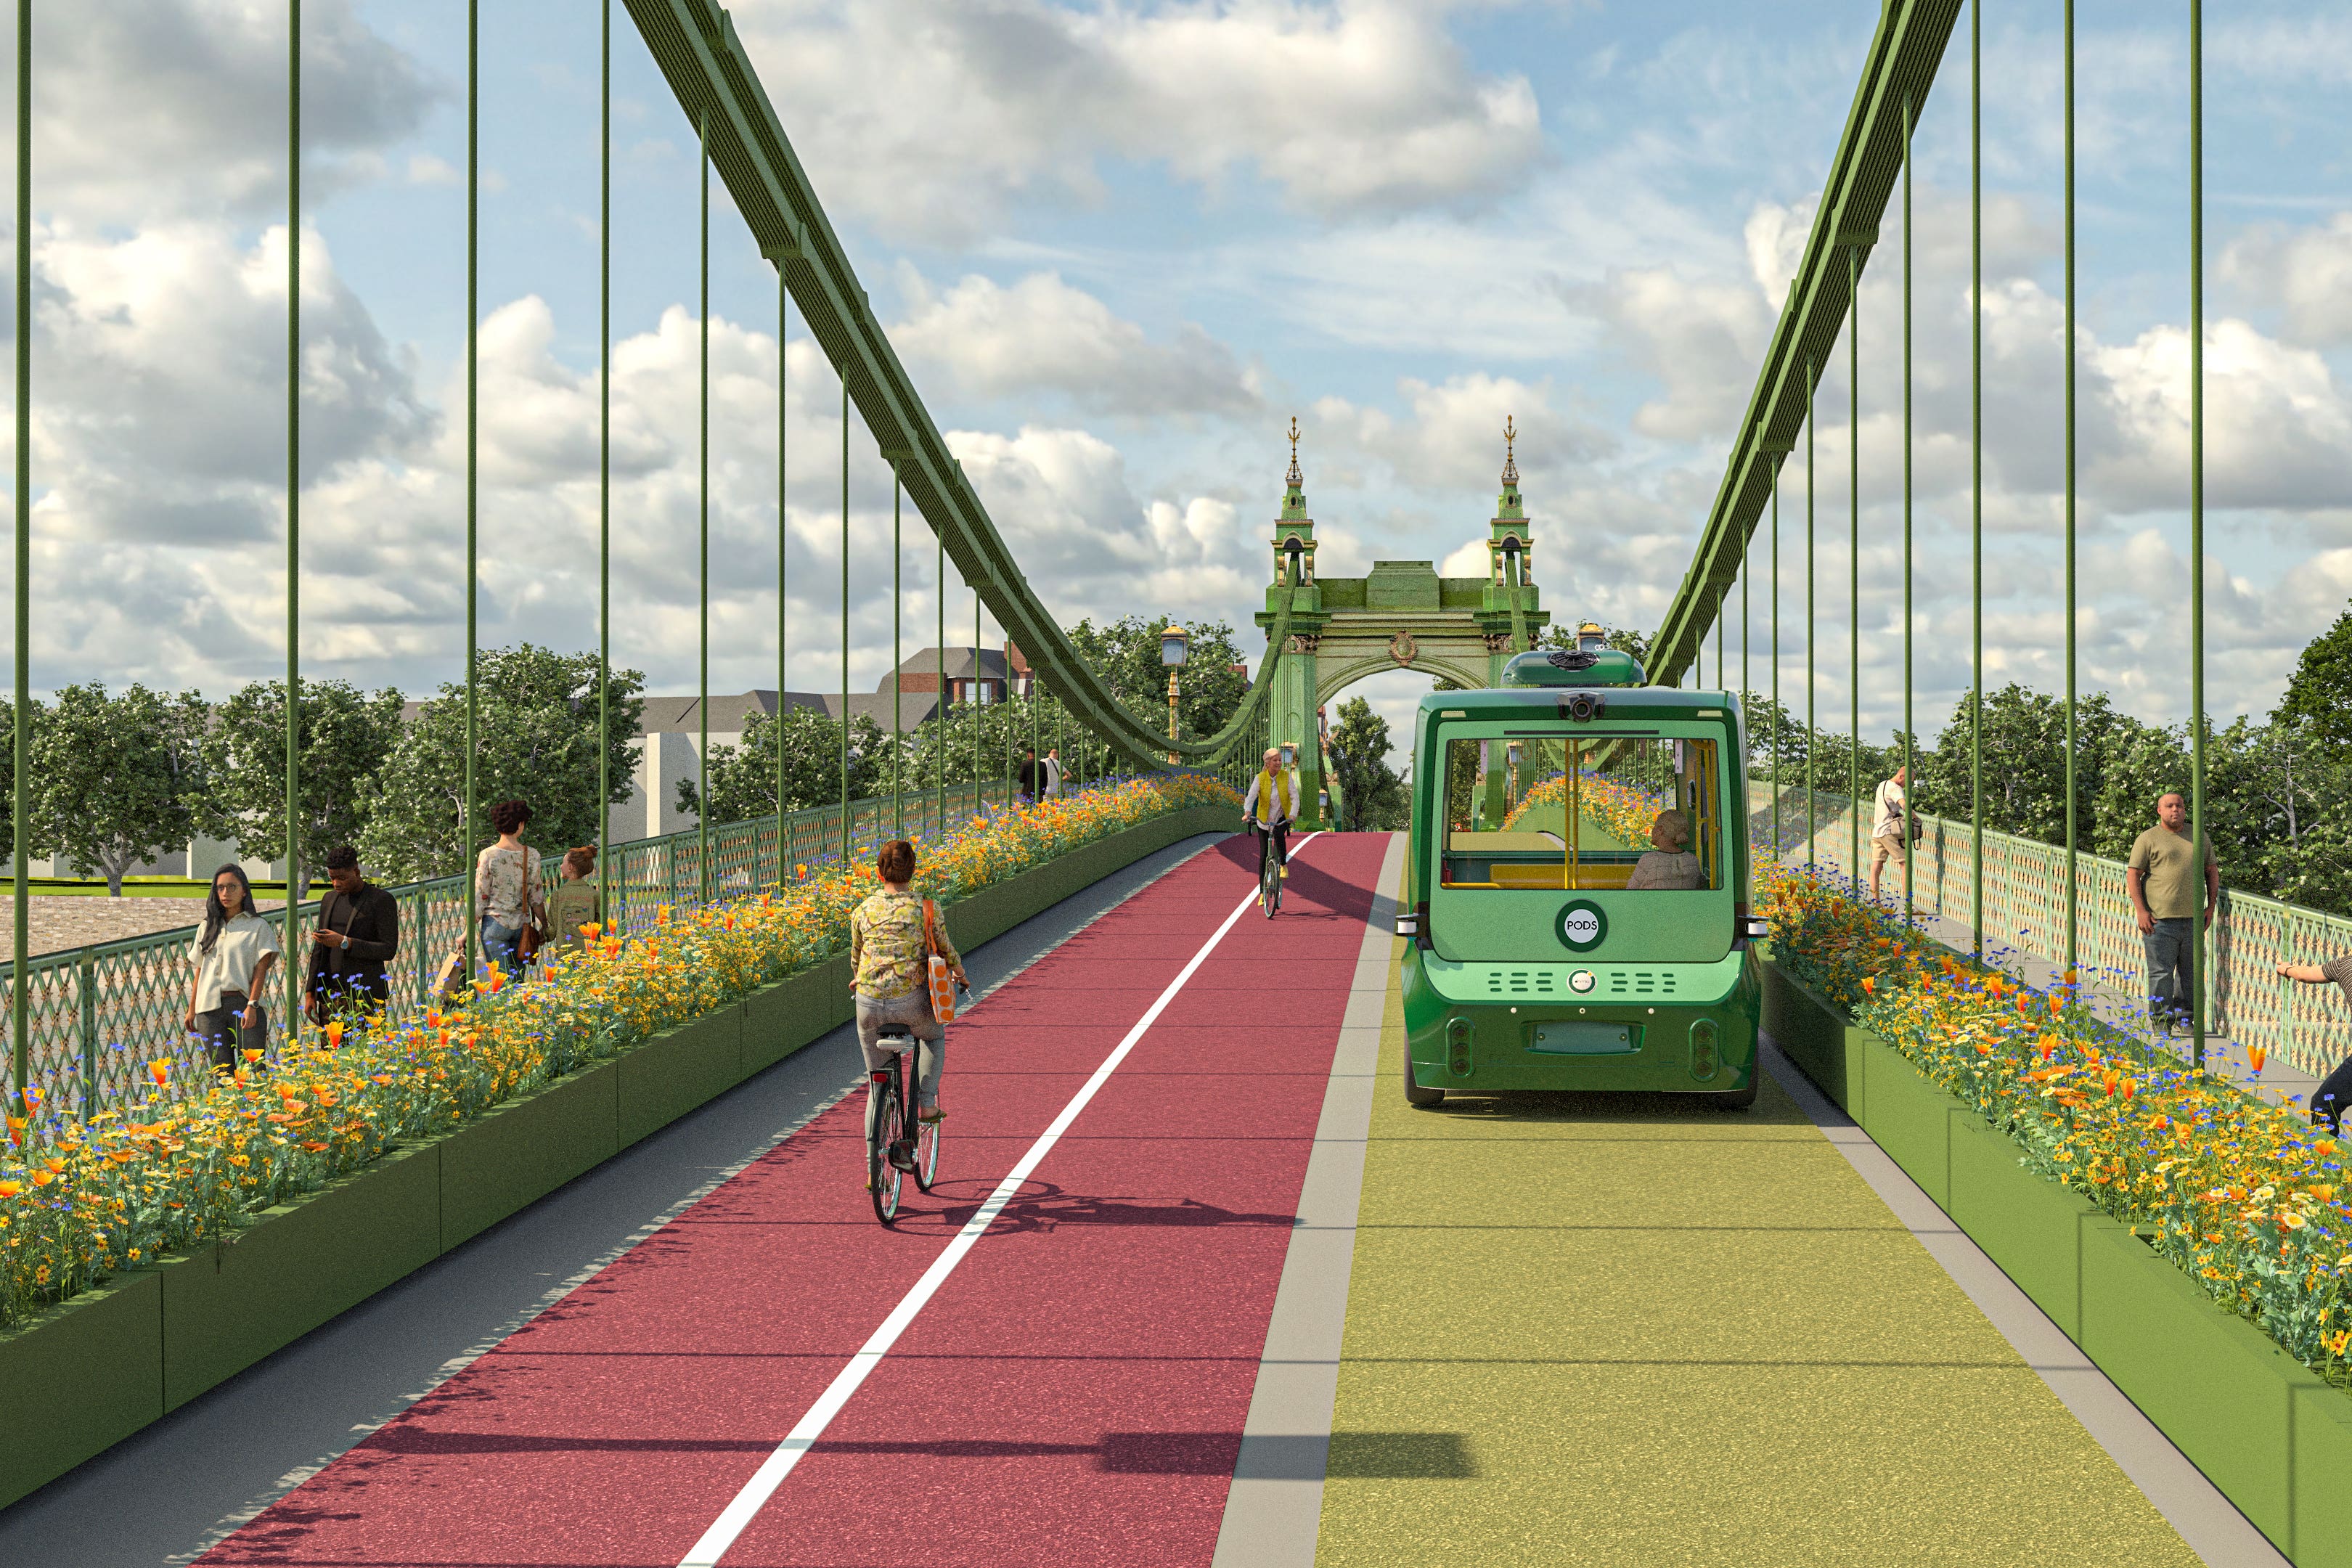 London’s Hammersmith Bridge plans have been subject to rows over funding